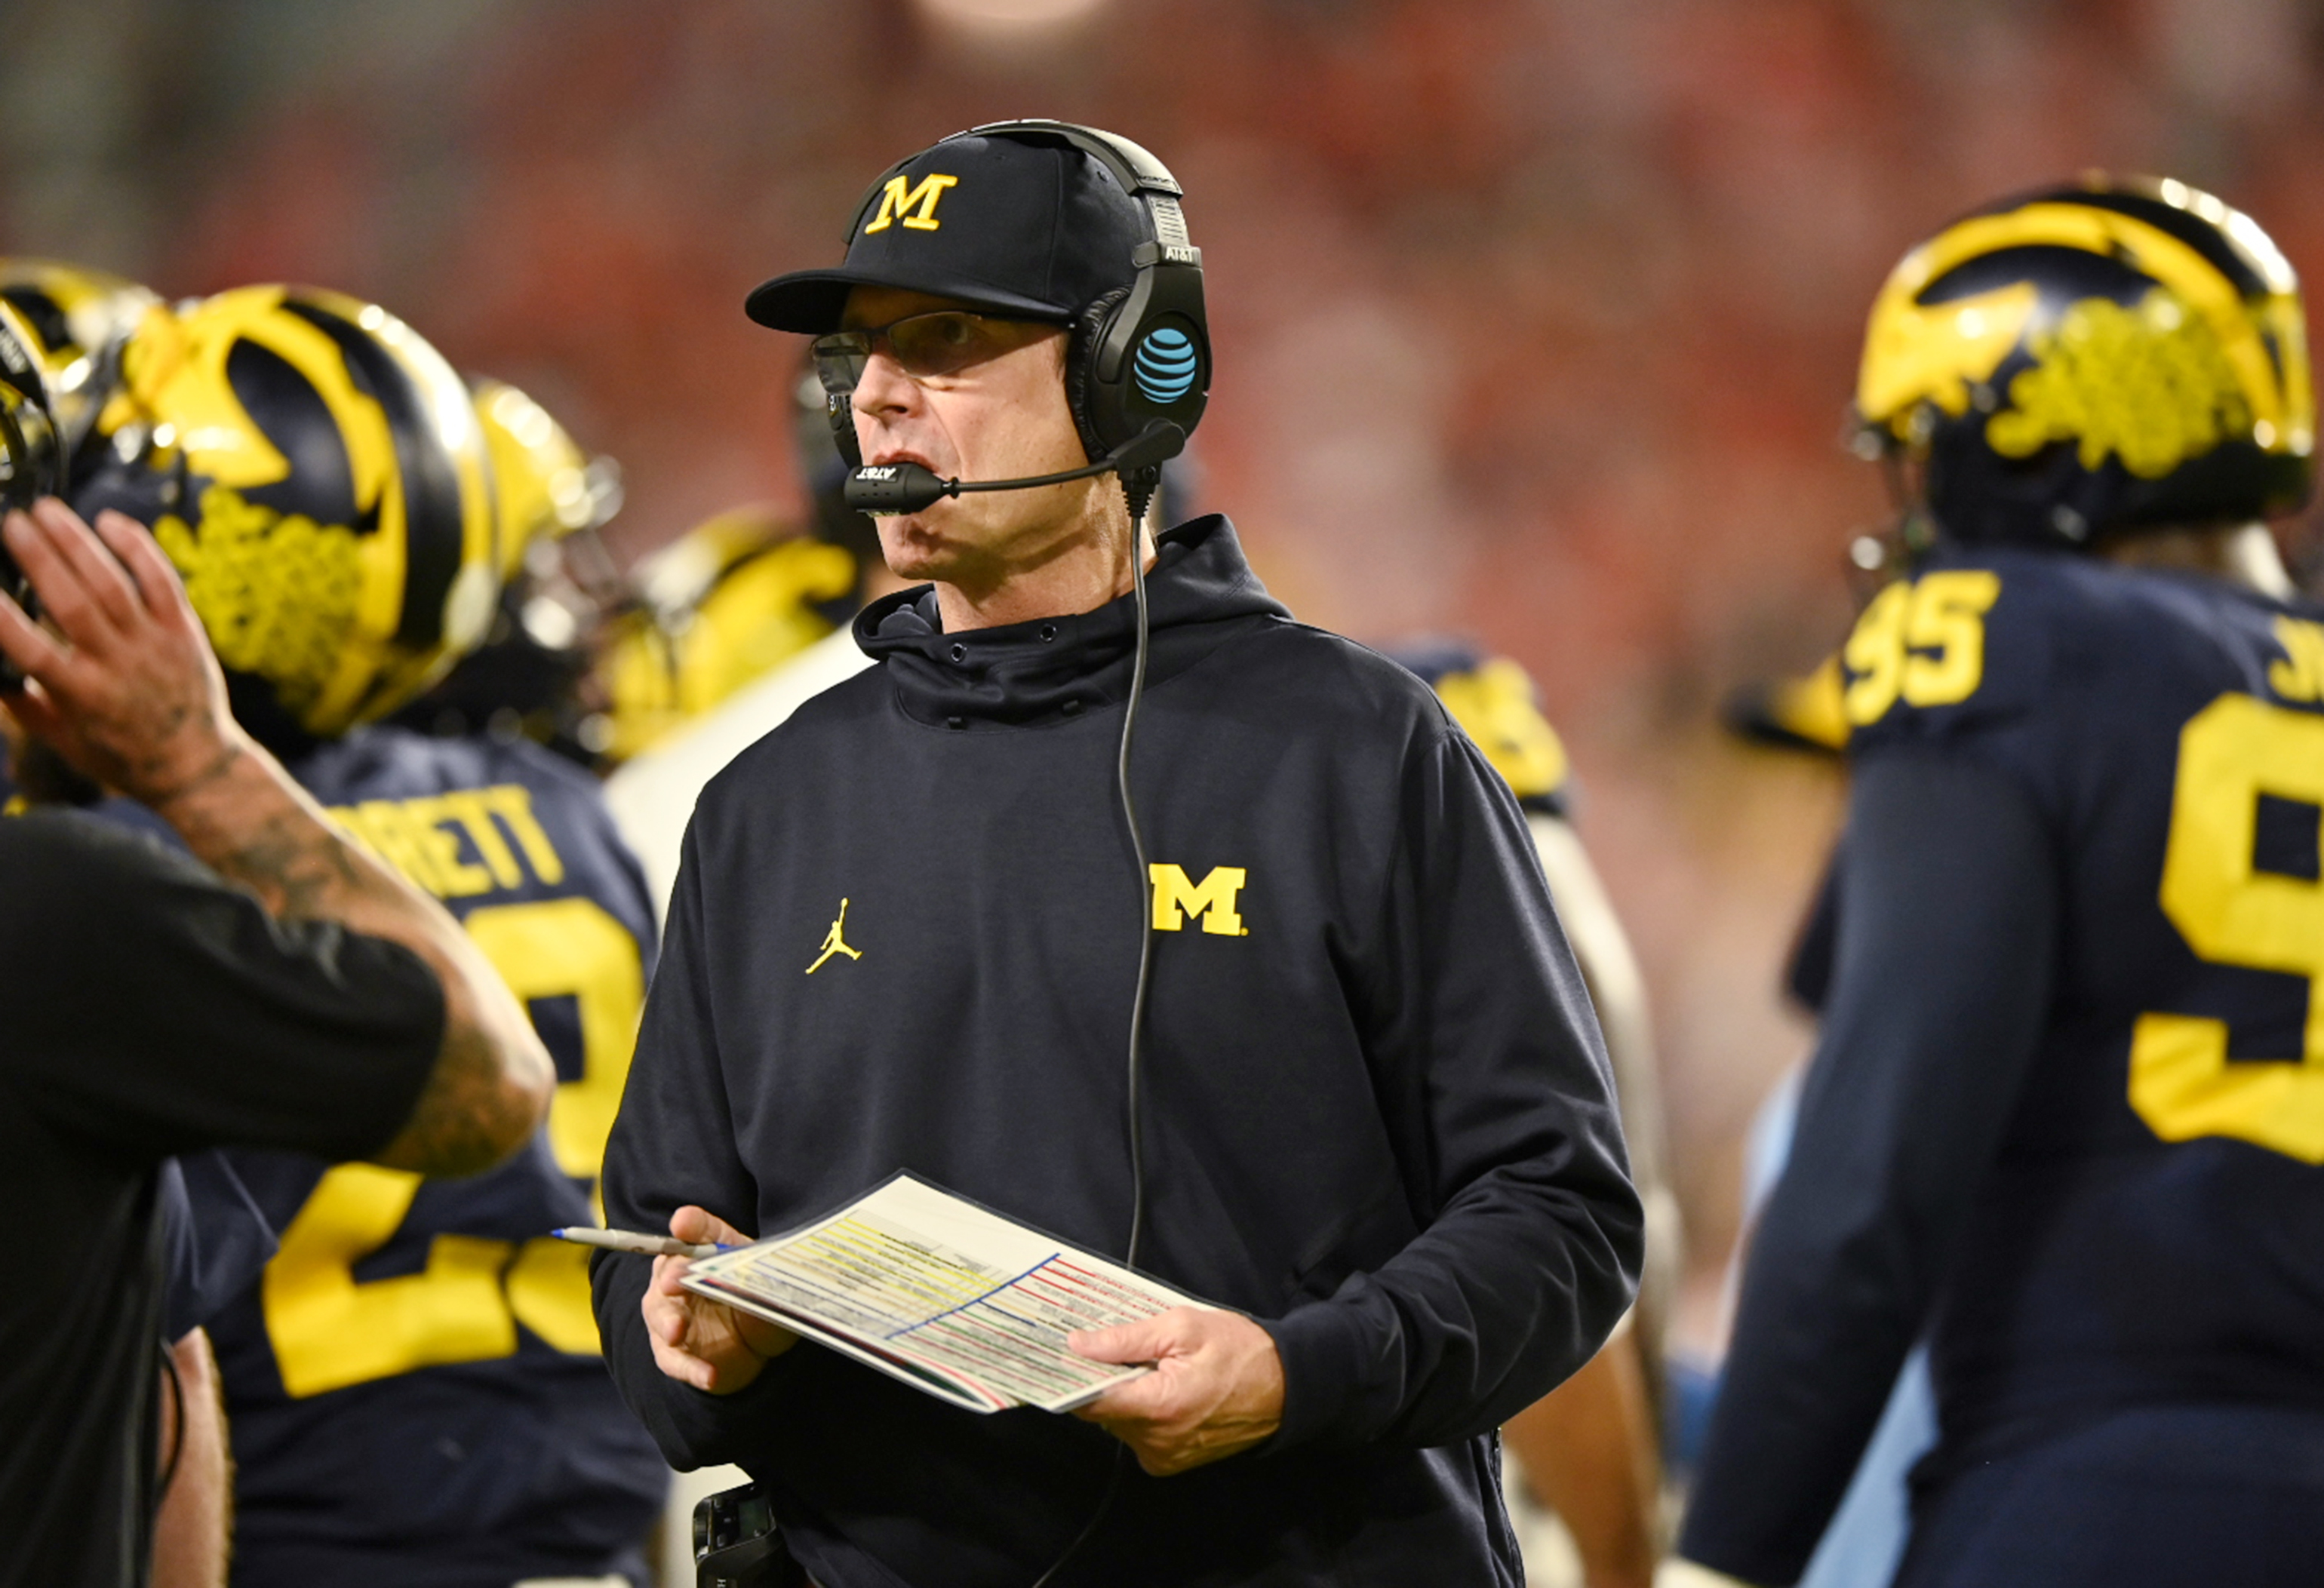 Jim Harbaugh's reworked contract at Michigan: Salary, buyout, incentive  details 